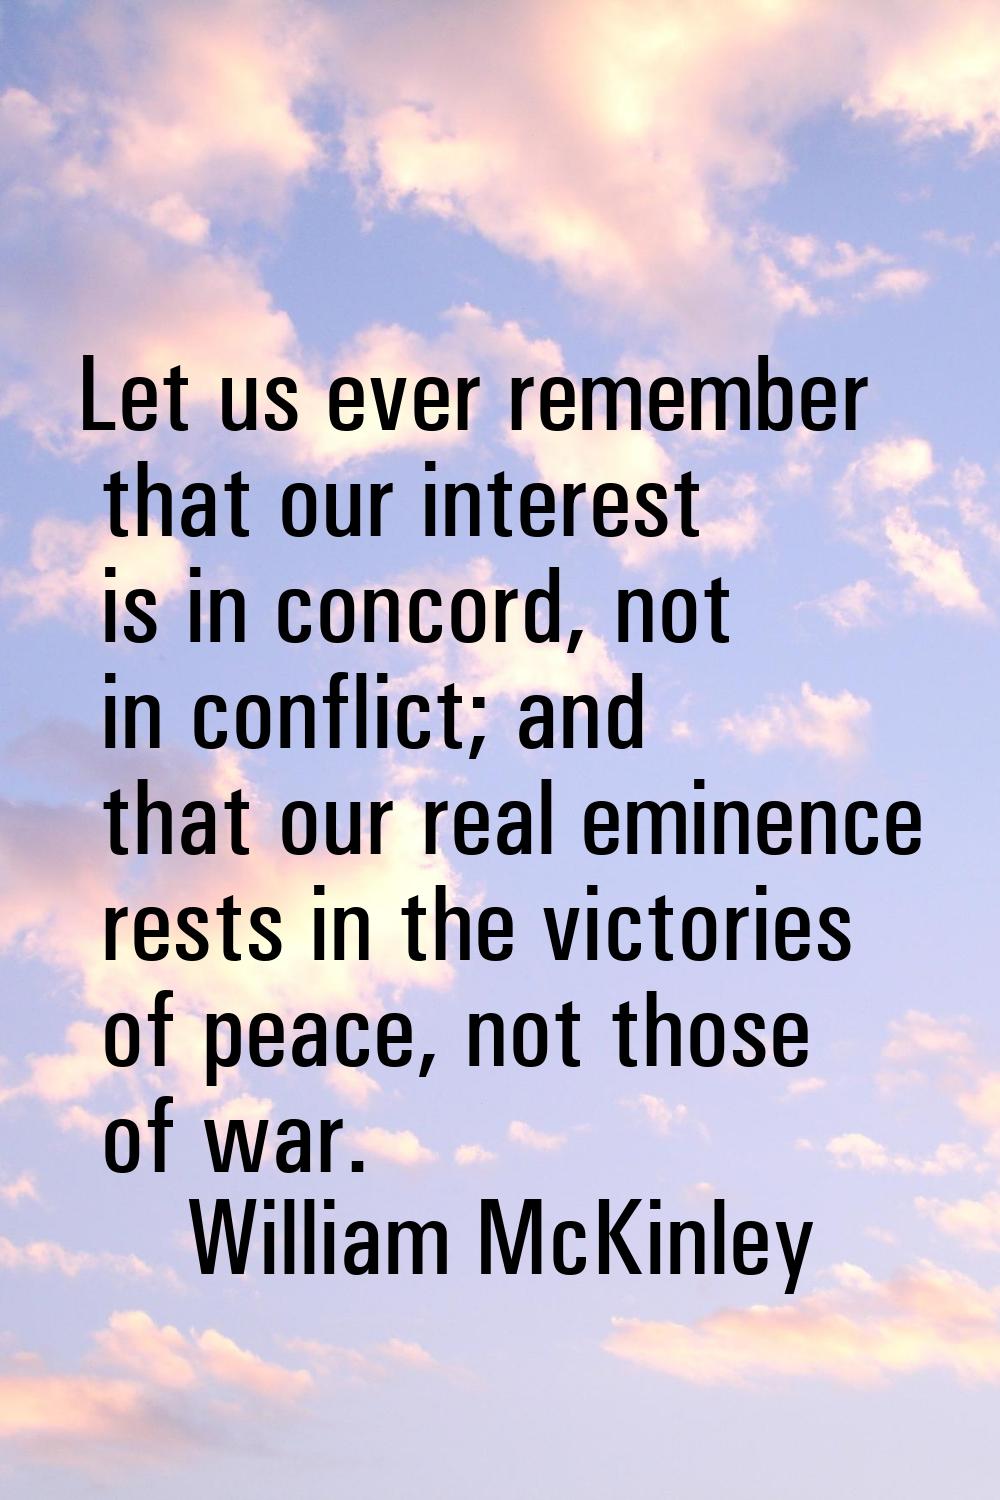 Let us ever remember that our interest is in concord, not in conflict; and that our real eminence r